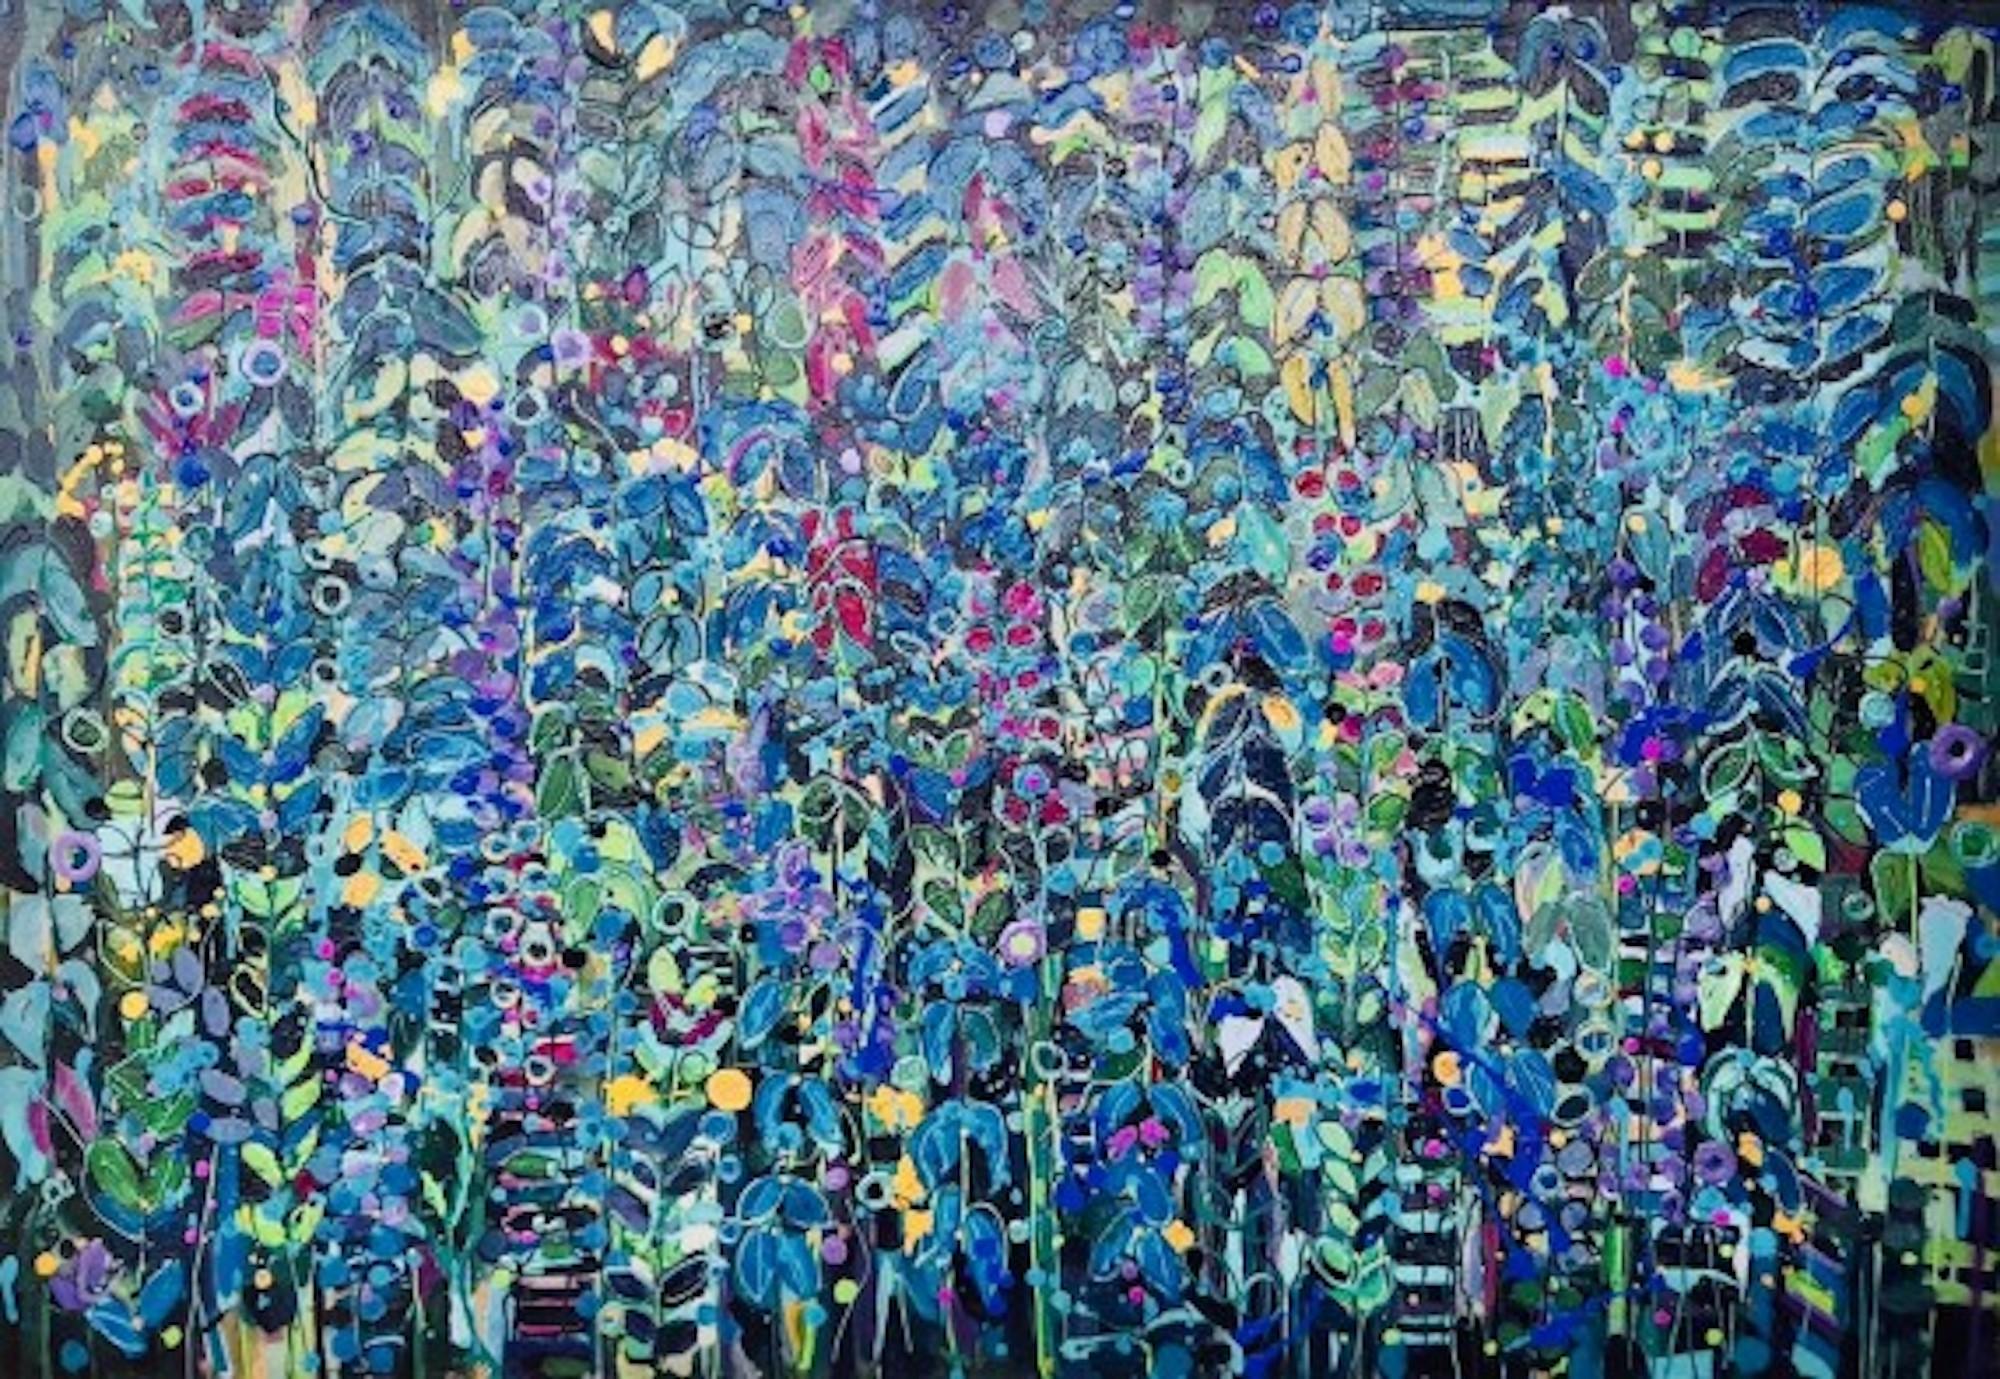 Purple & Blue Tangle, Vibrant Floral Painting, Artwork Inspired by Nature